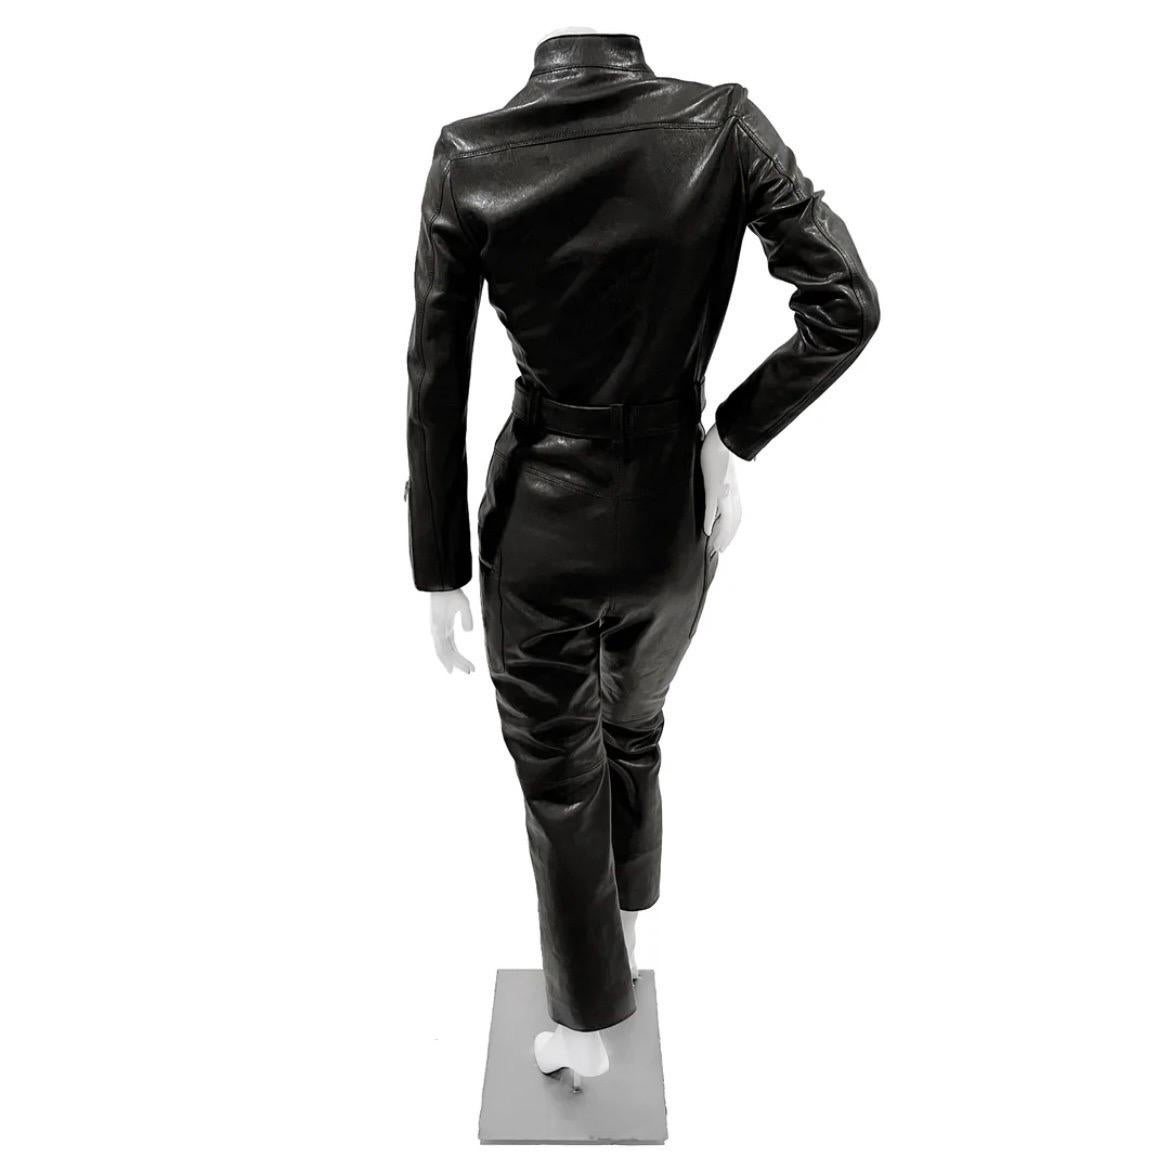 Leather Long Sleeve Jumpsuit by Maria Grazia Chiuri for Christian Dior
Autumn 2020 Ready-To-Wear
Made in Italy
Black lamb leather
Large front zip closure
Long sleeve
Silver tone hardware
Snap button closure around neck
Adjustable removable